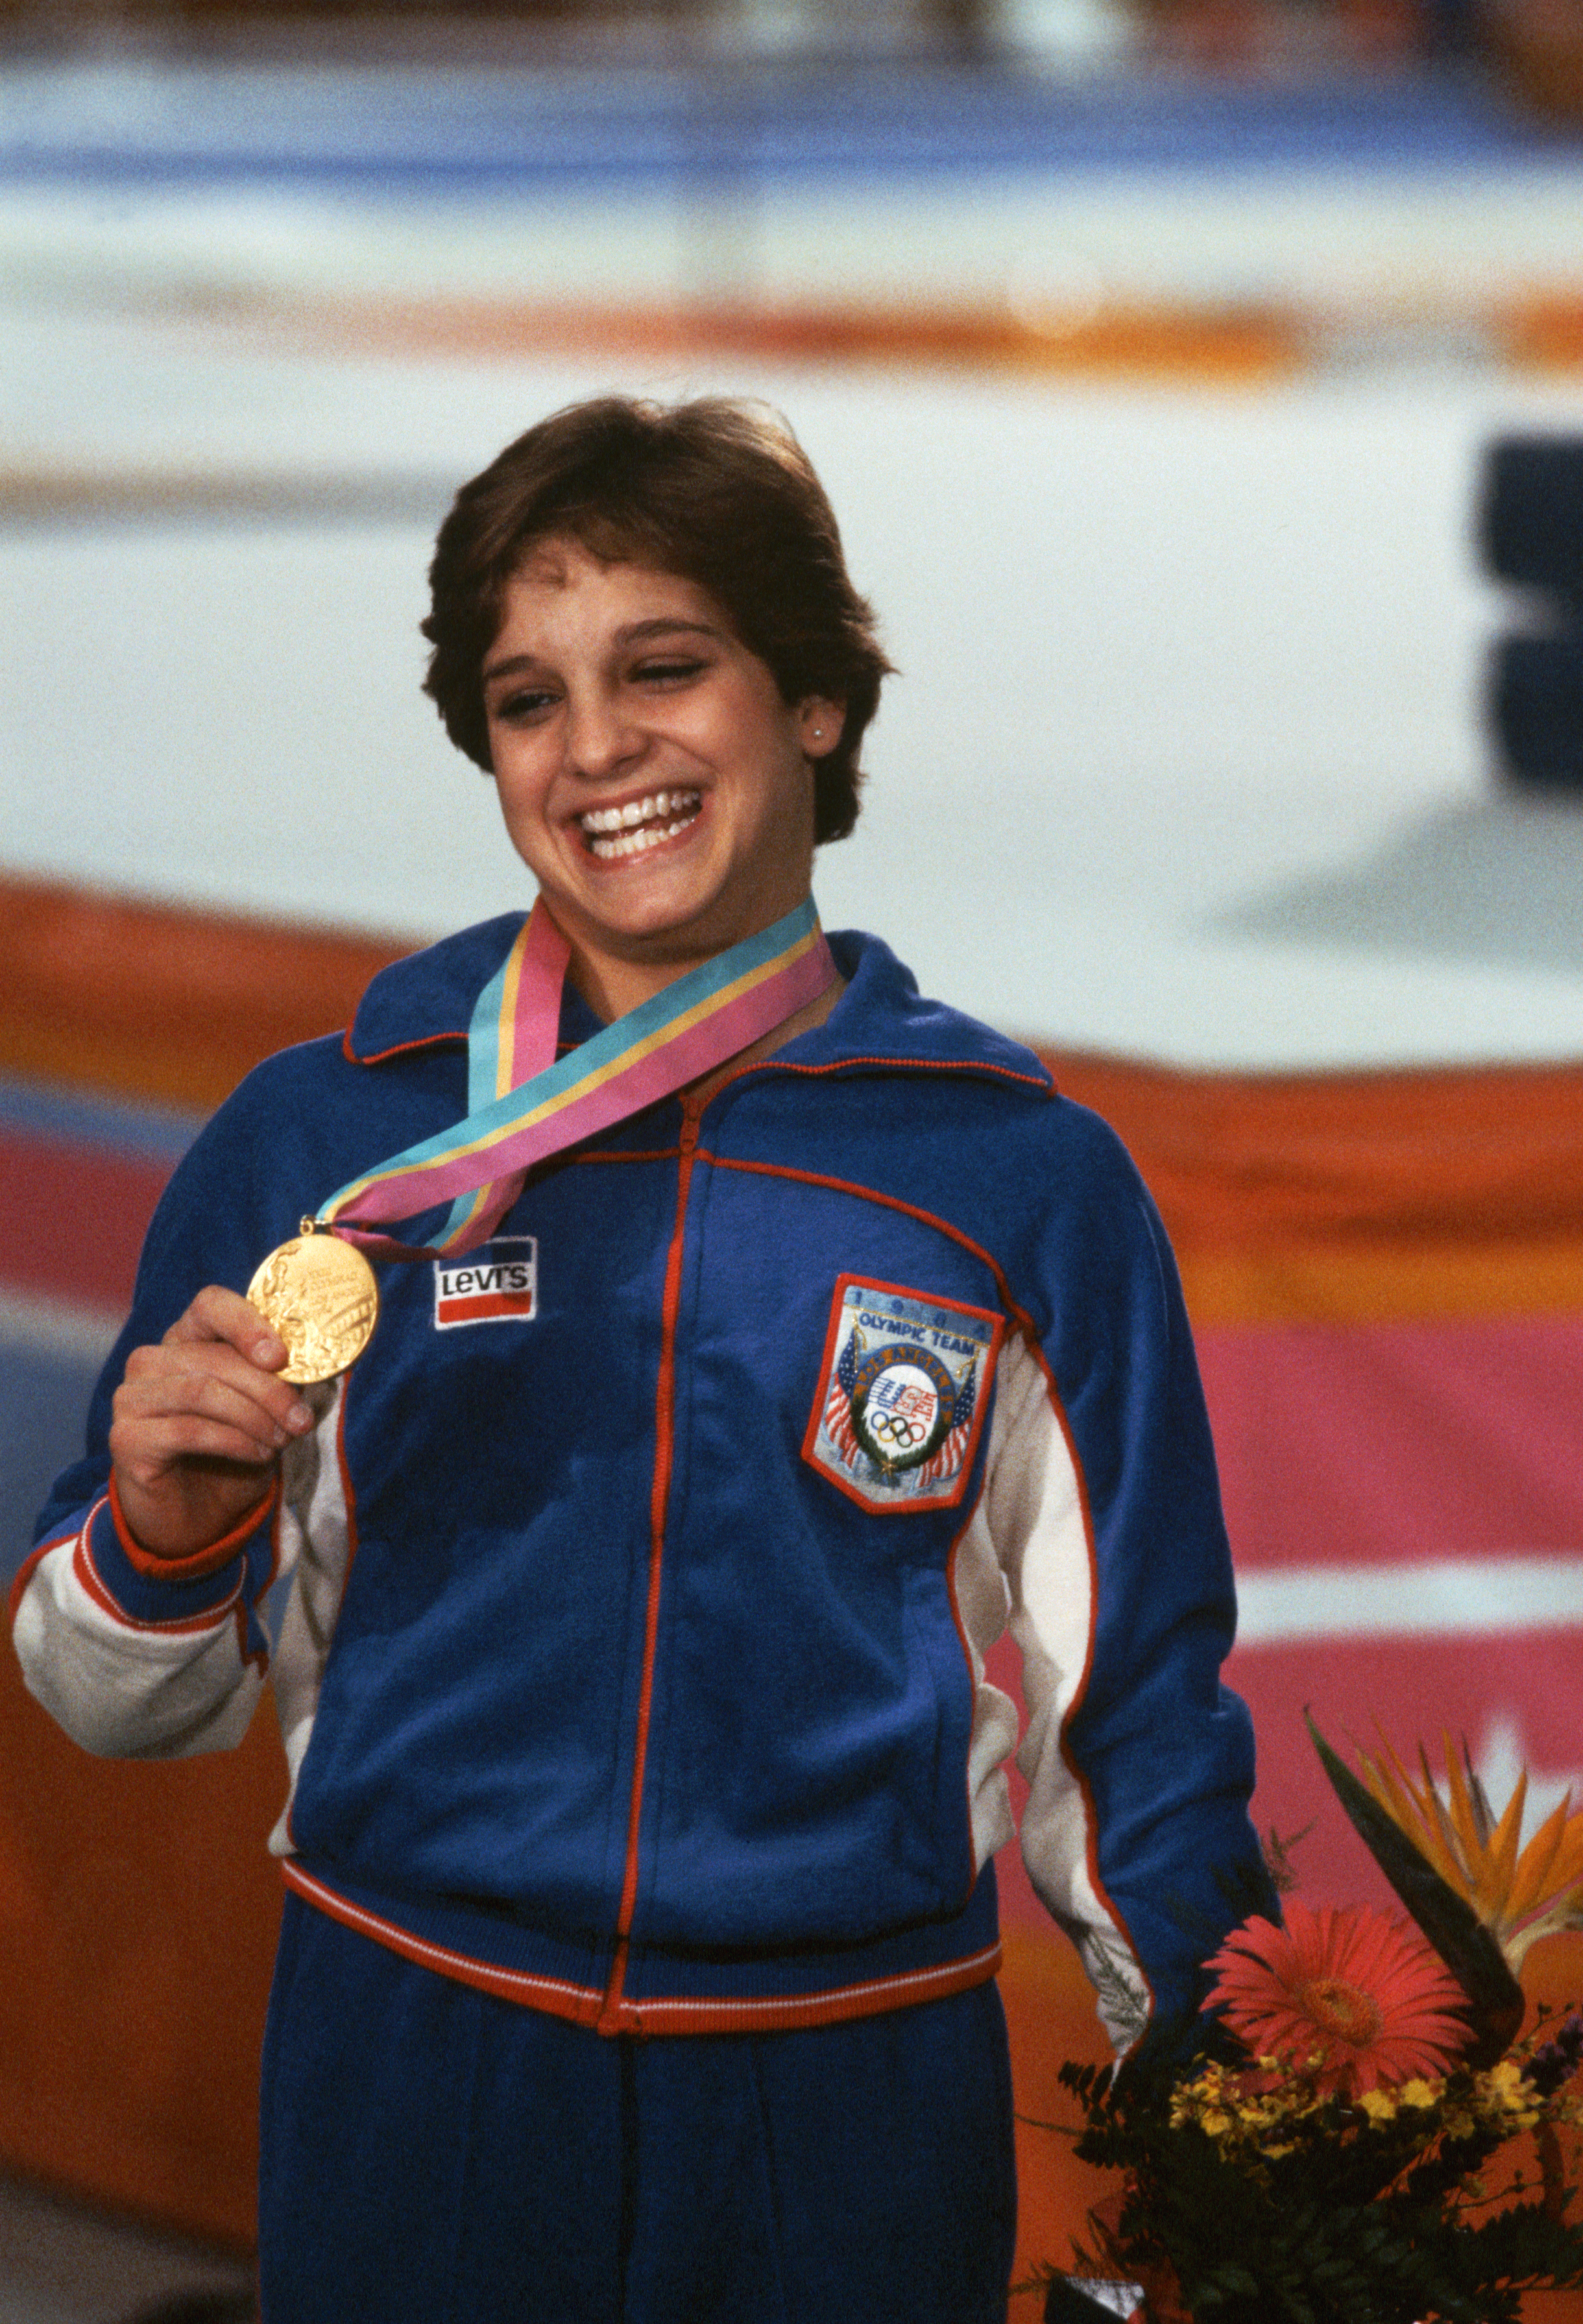 Mary Lou Retton at the Women's Gymnastics Combined event at the 1984 Los Angeles Summer Olympic Games. | Source: Getty Images